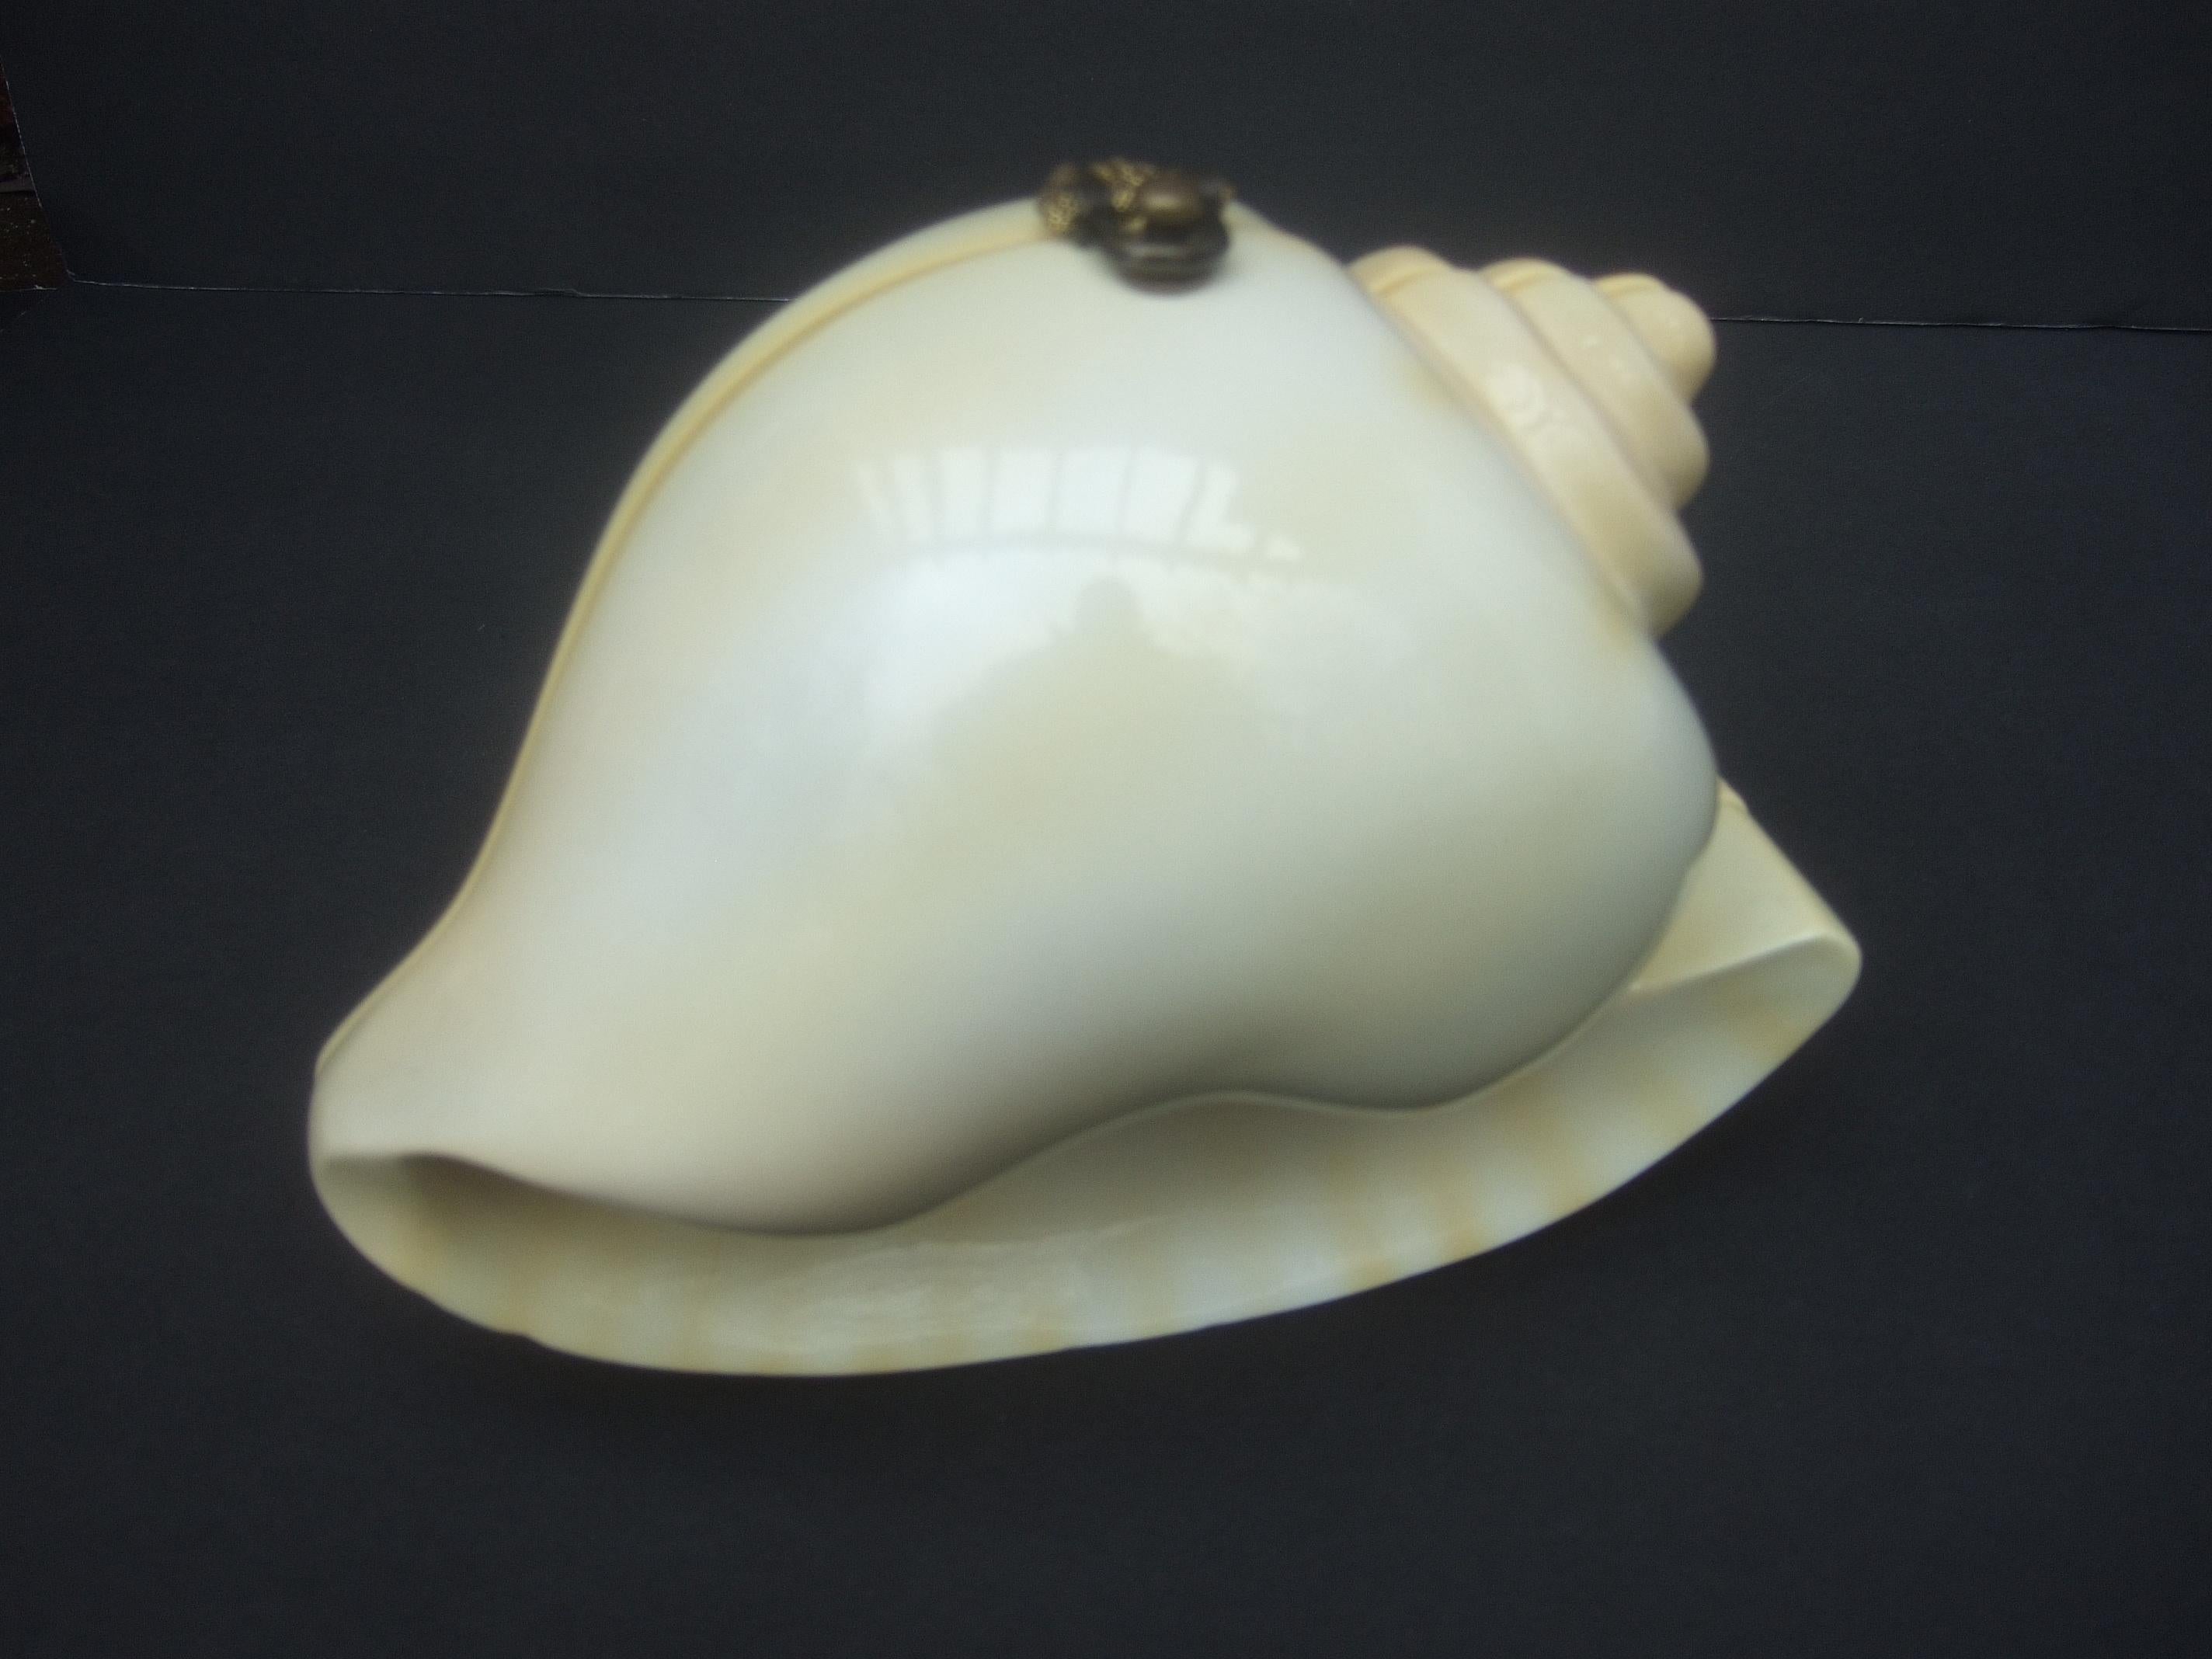 Timmy Woods Beverly Hills hand carved wood enamel conch shell artisan handbag c 1990s
The unique hand carved wood shell handbag is sheathed in a smooth cream color enamel 
lacquer with subtle streaks of pale yellow enamel

The versatile handbag may